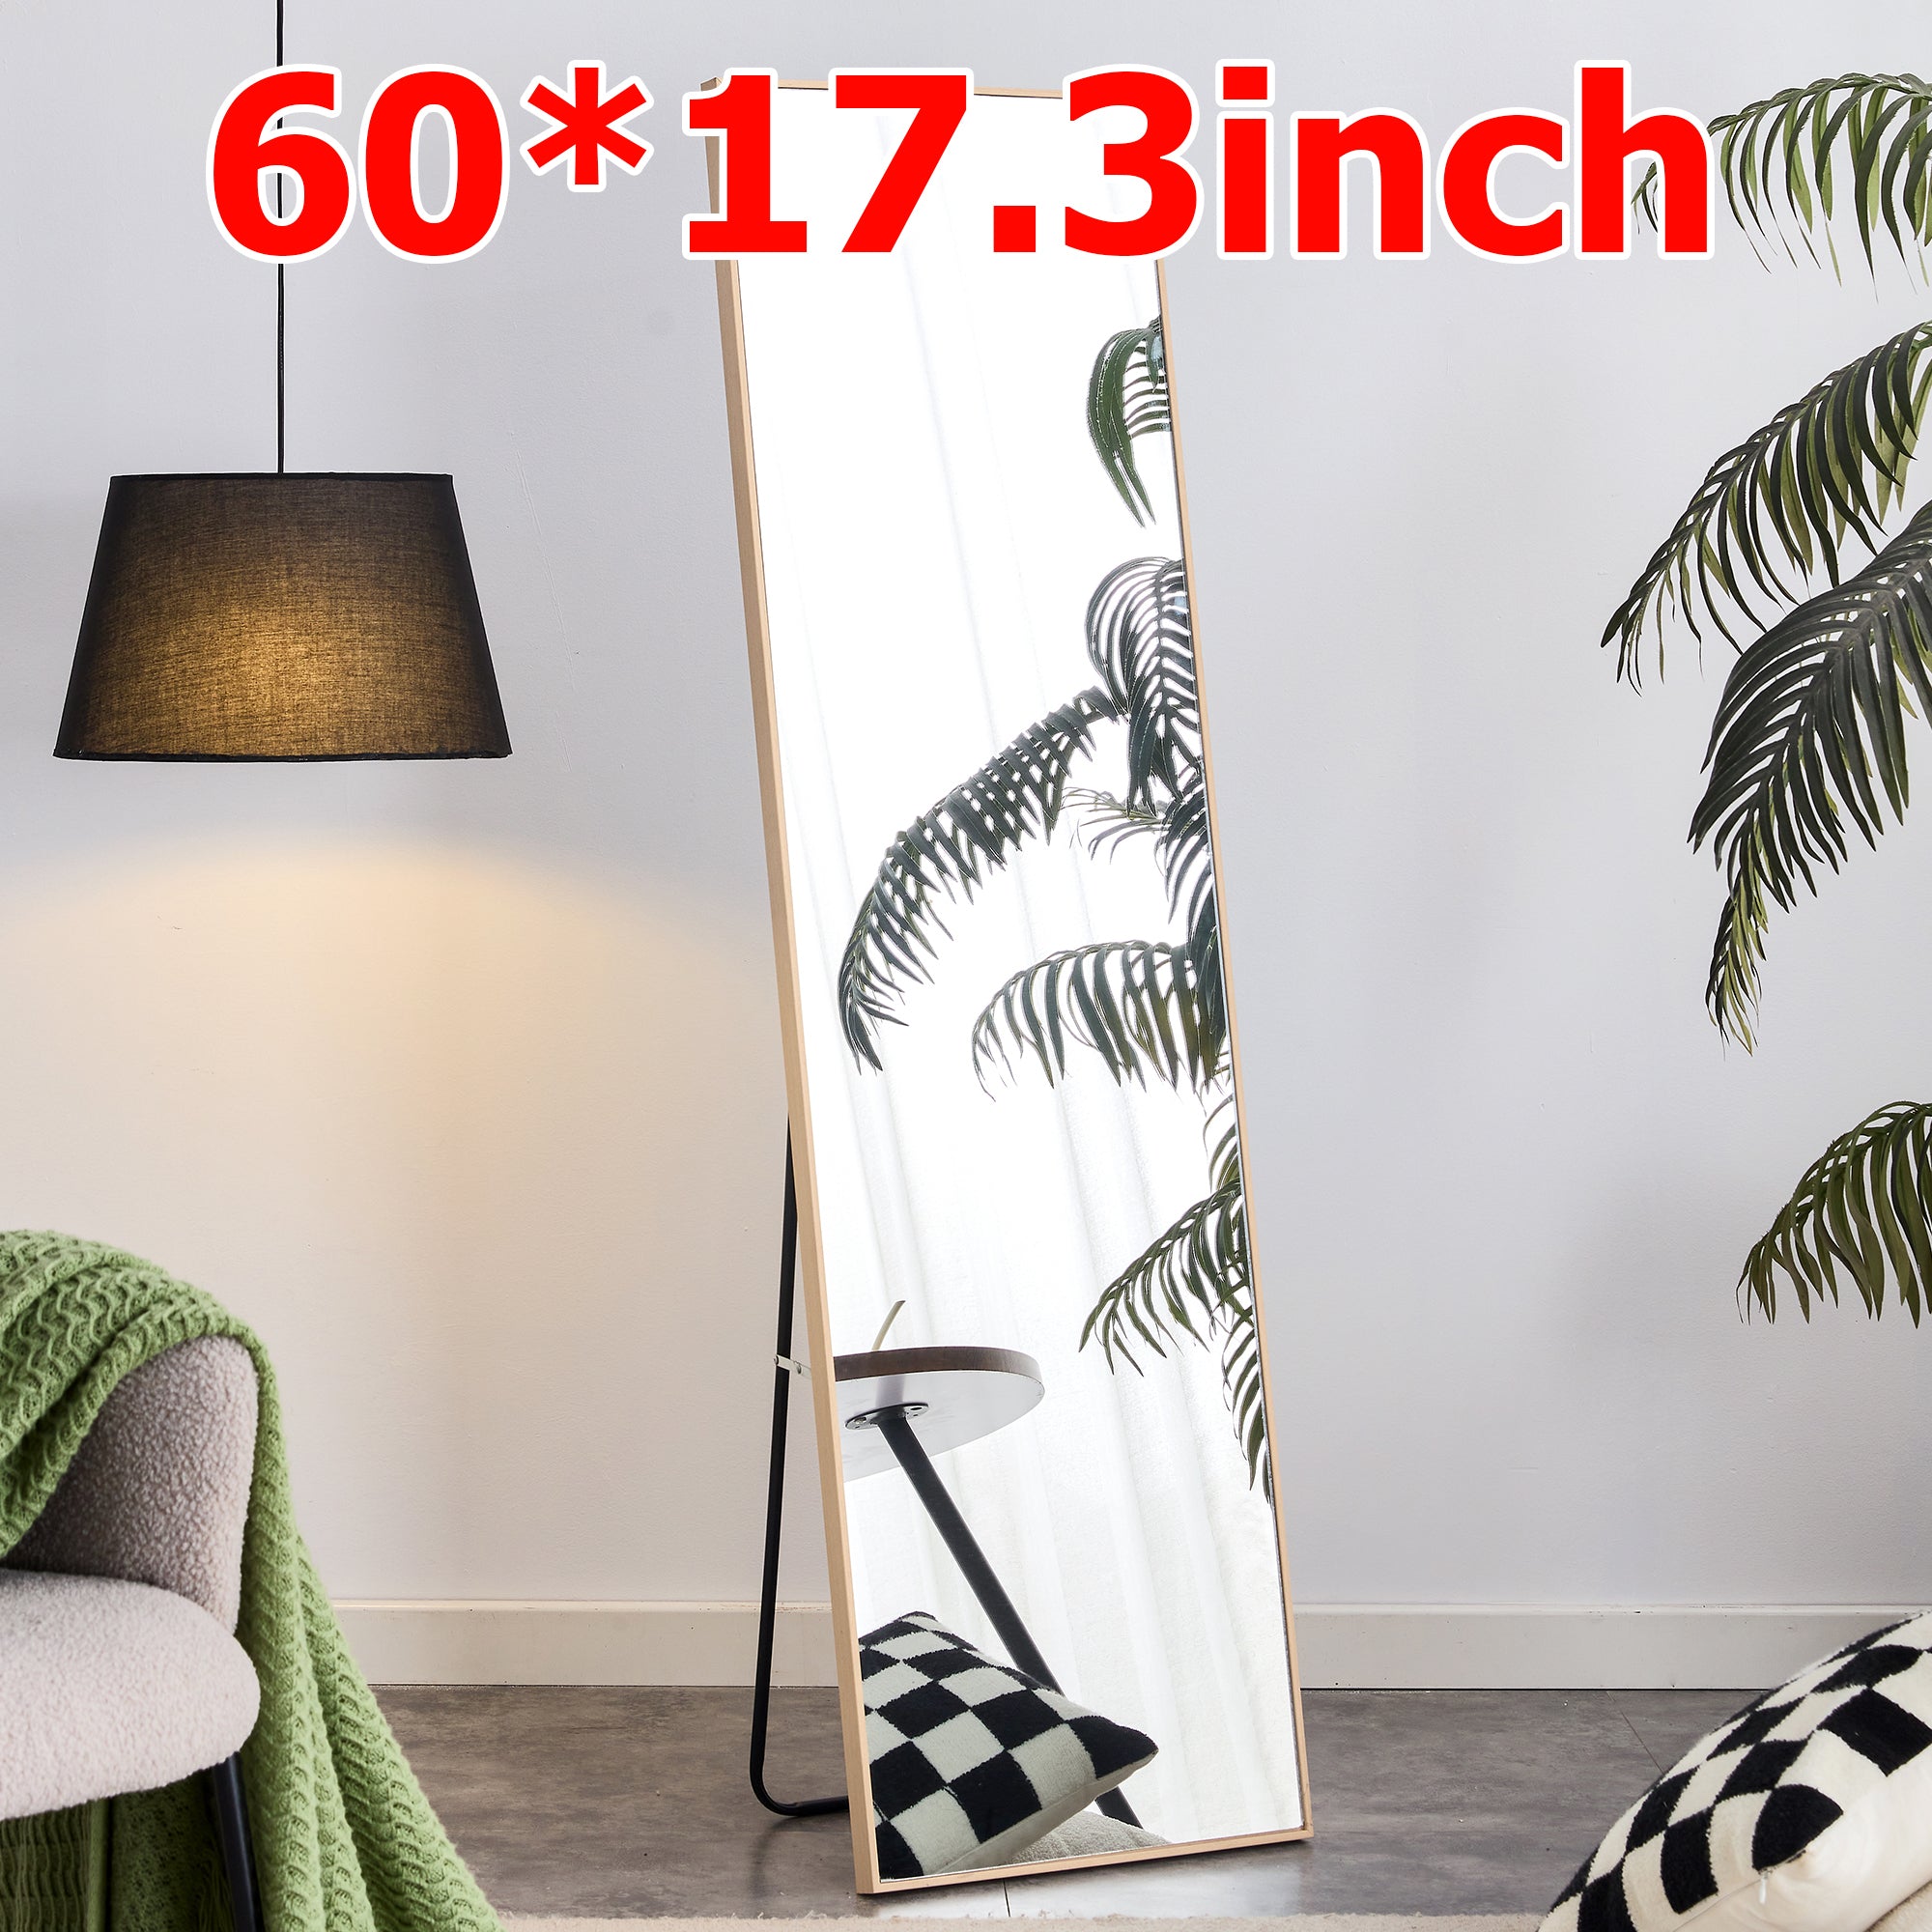 60" Tall Standing Mirror with Light Oak Wood Frame 